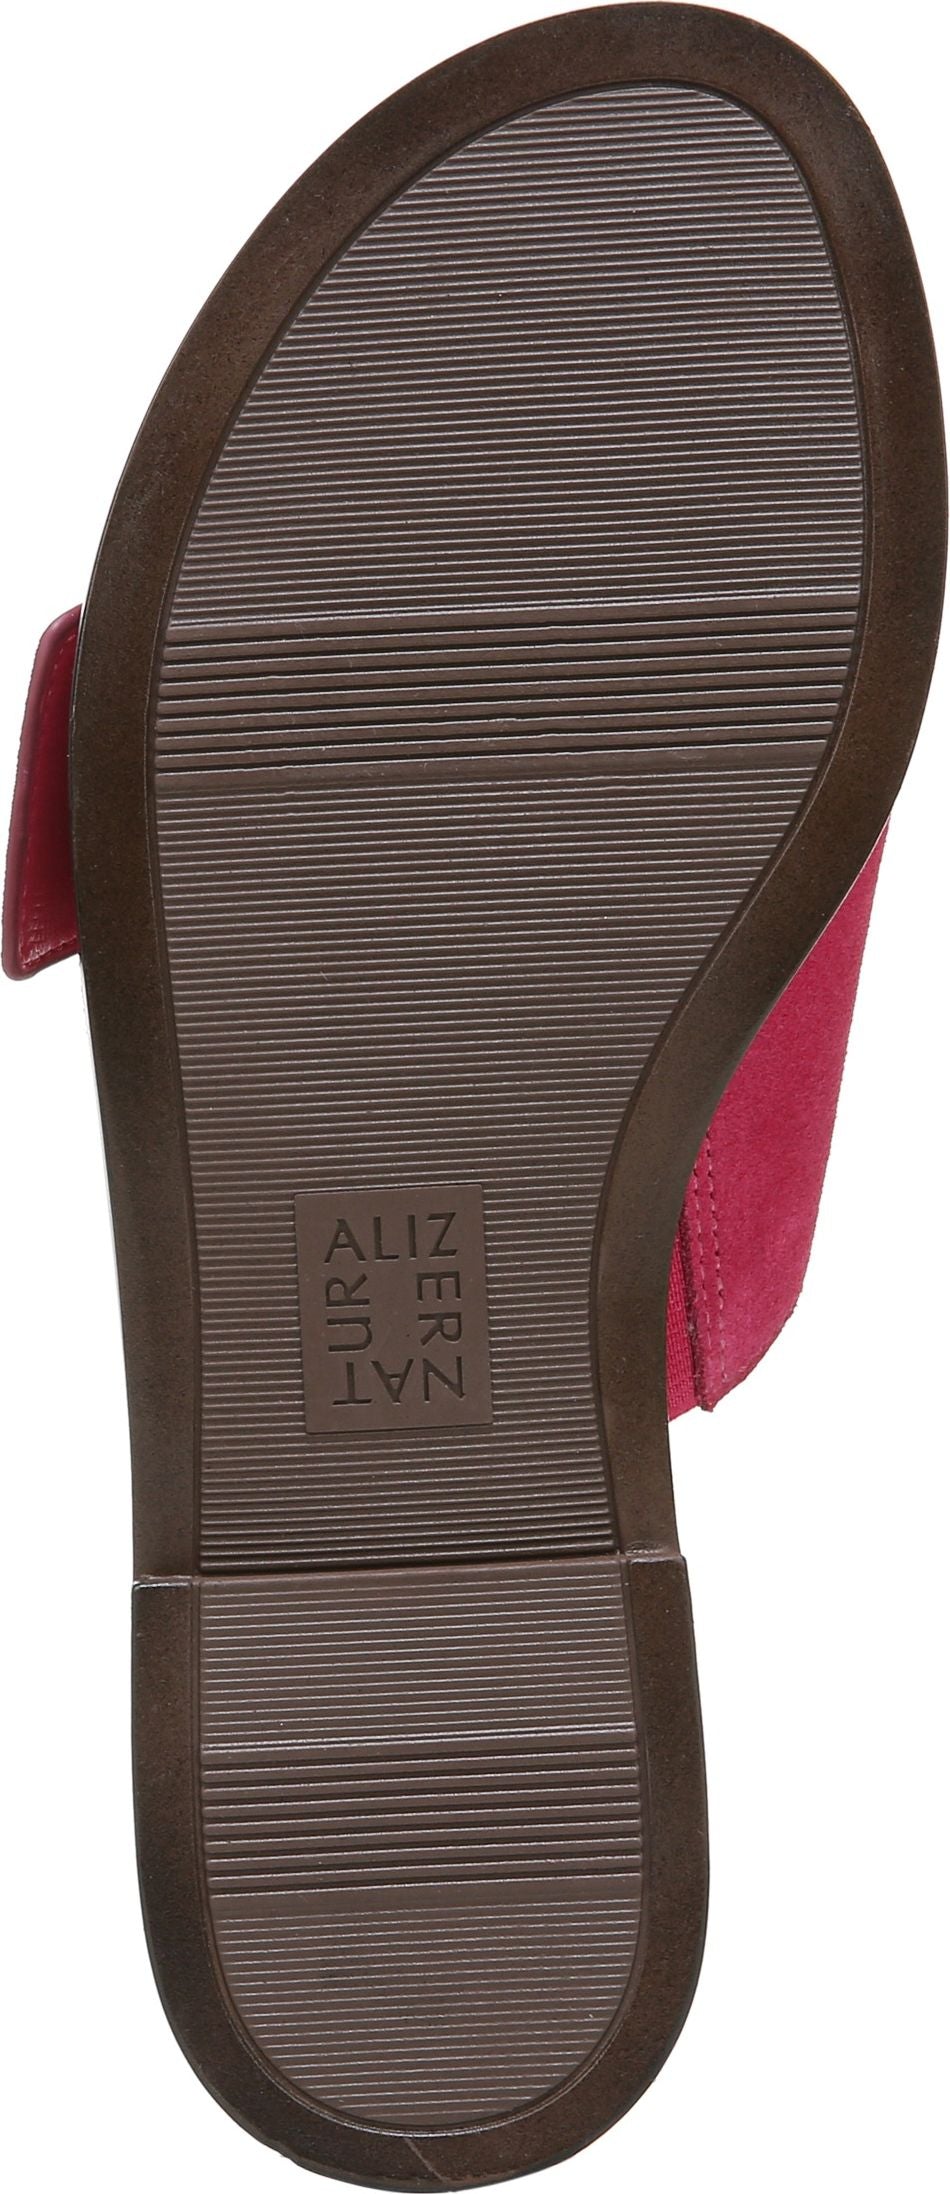 Naturalizer Sandals Forrest Crushed Berry Suede - Wide